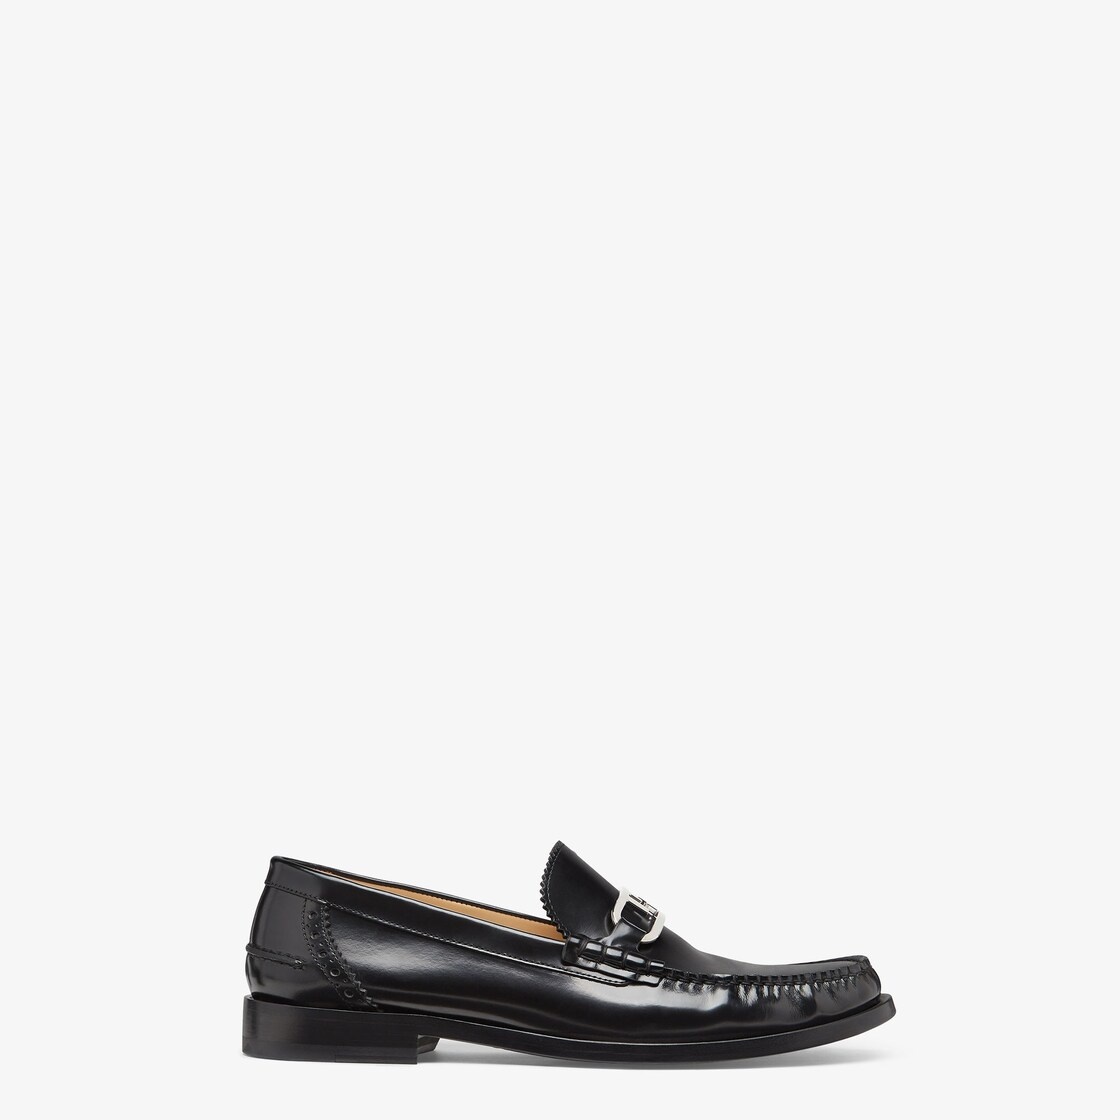 Black leather loafers - 2